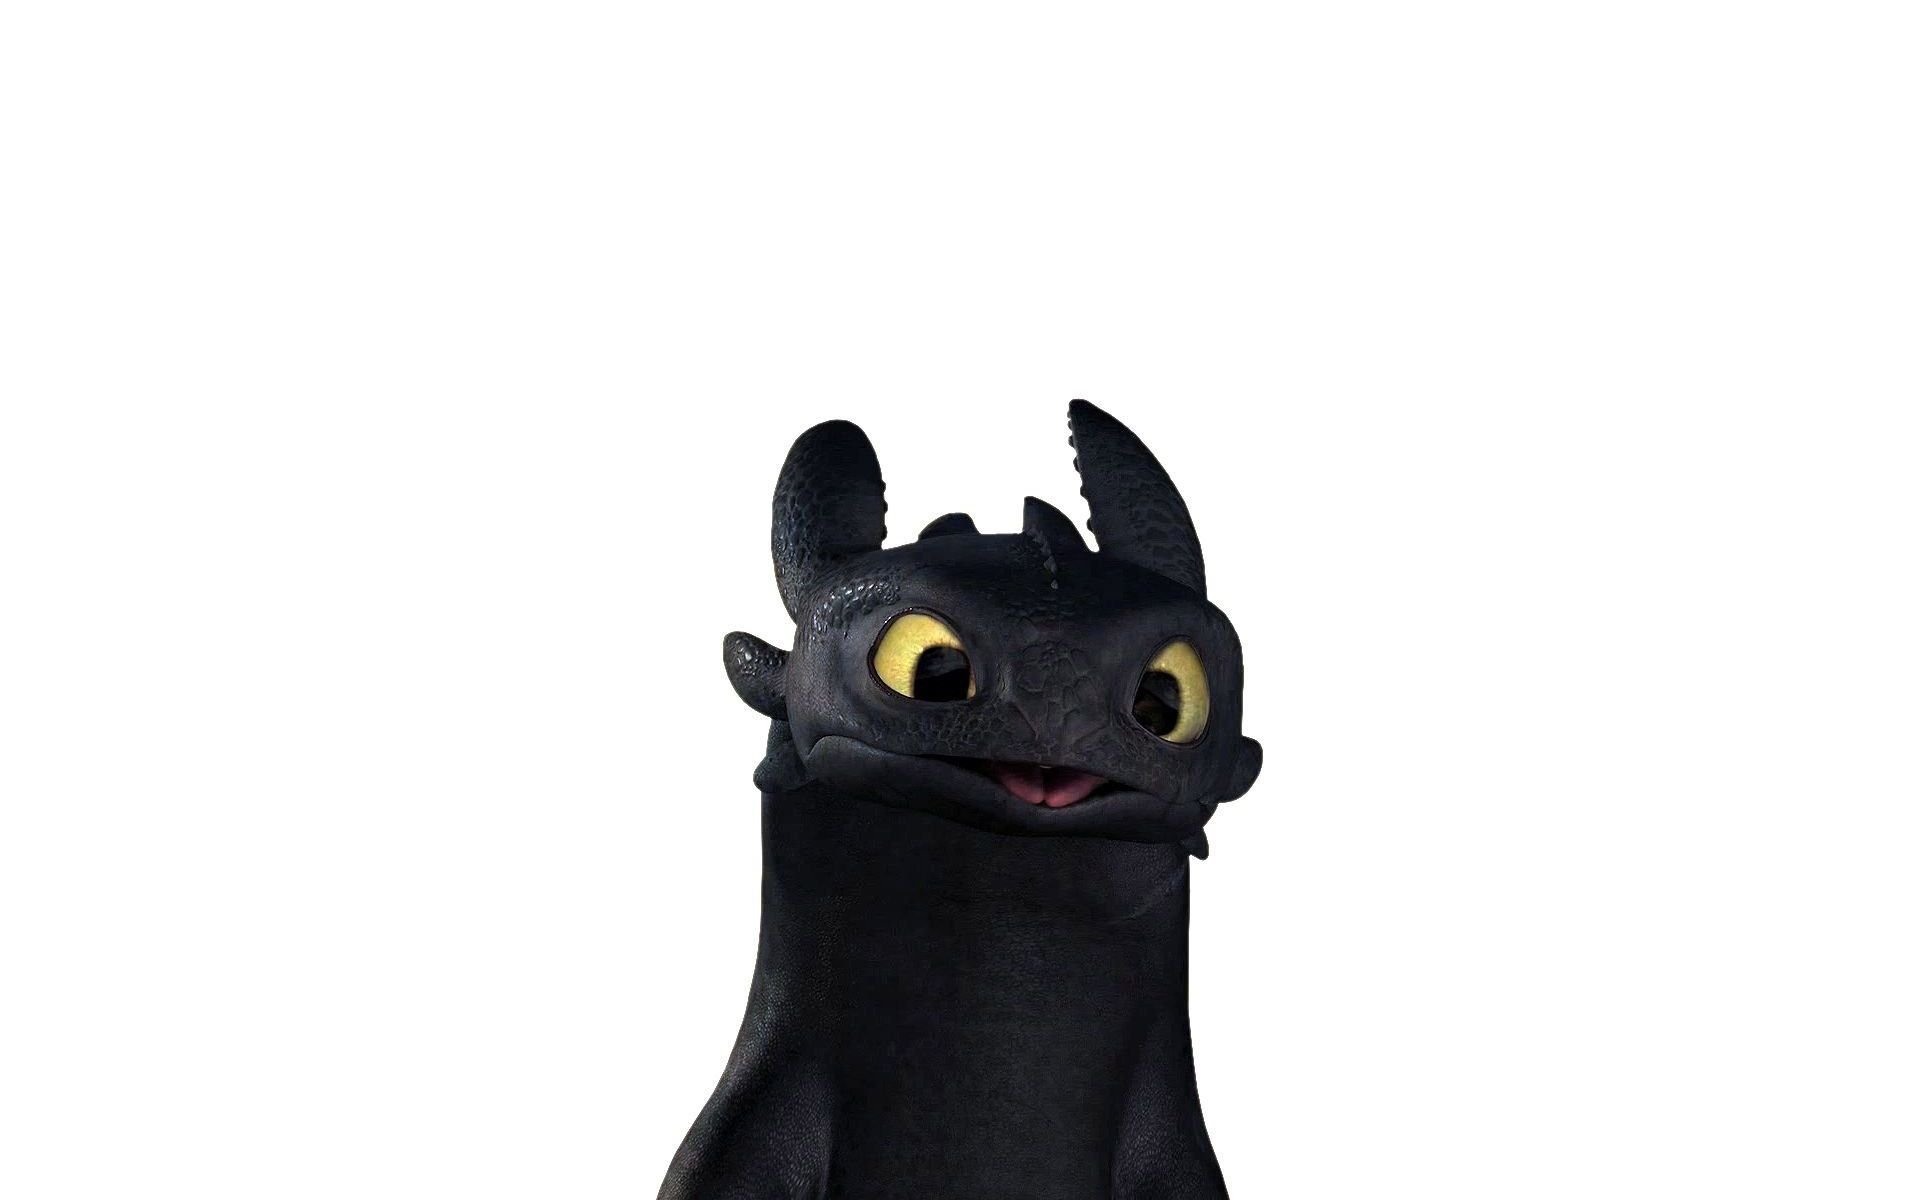 1920x1200 How To Train Your Dragon Wallpapers | Toothless wallpaper, How train your dragon, How to train your drag